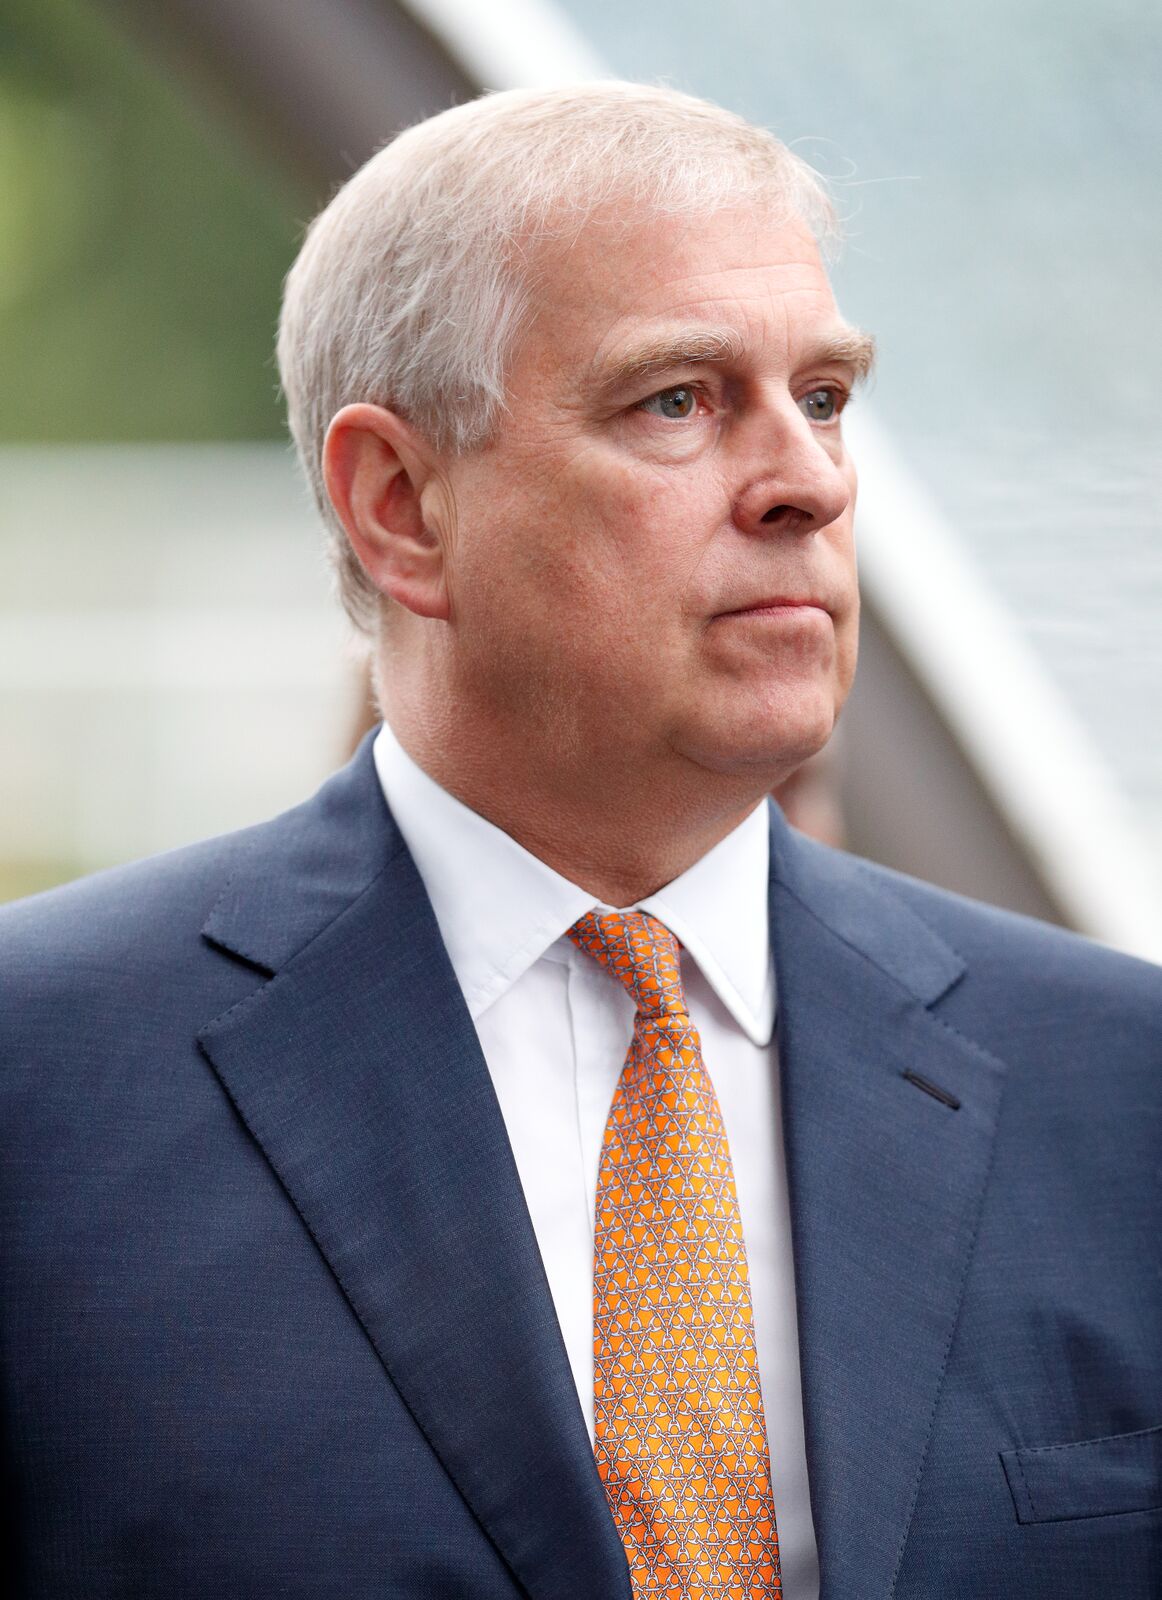  Prince Andrew, Duke of York attends the King George VI racing meet at Ascot Racecourse on July 29, 2017 in Ascot, England | Photo: Getty Images 